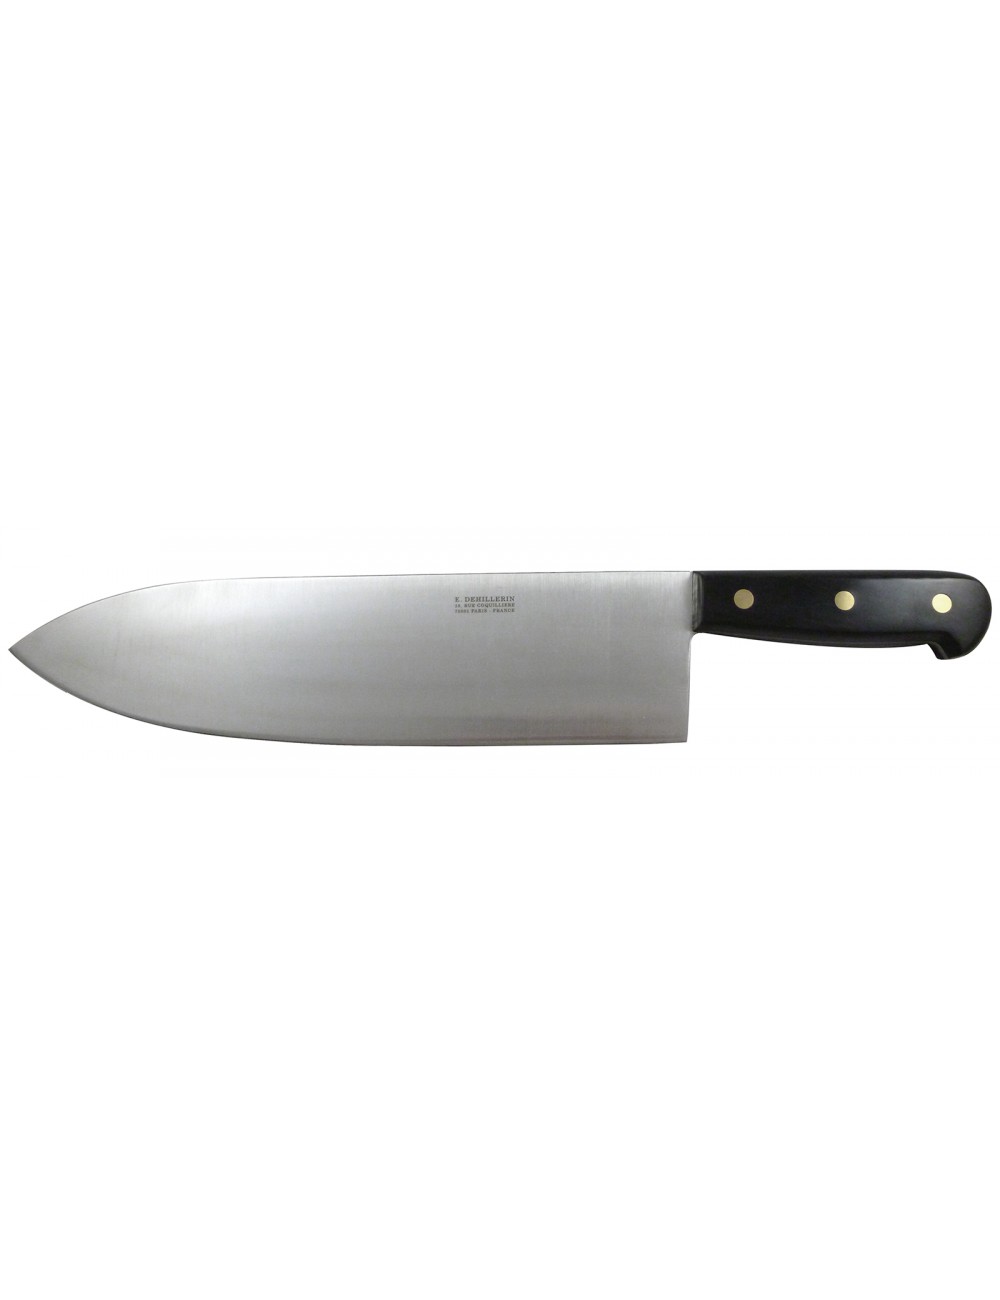 SLAUGHTER KNIFE - STAINLESS STEEL - PASTELLO HANDLE